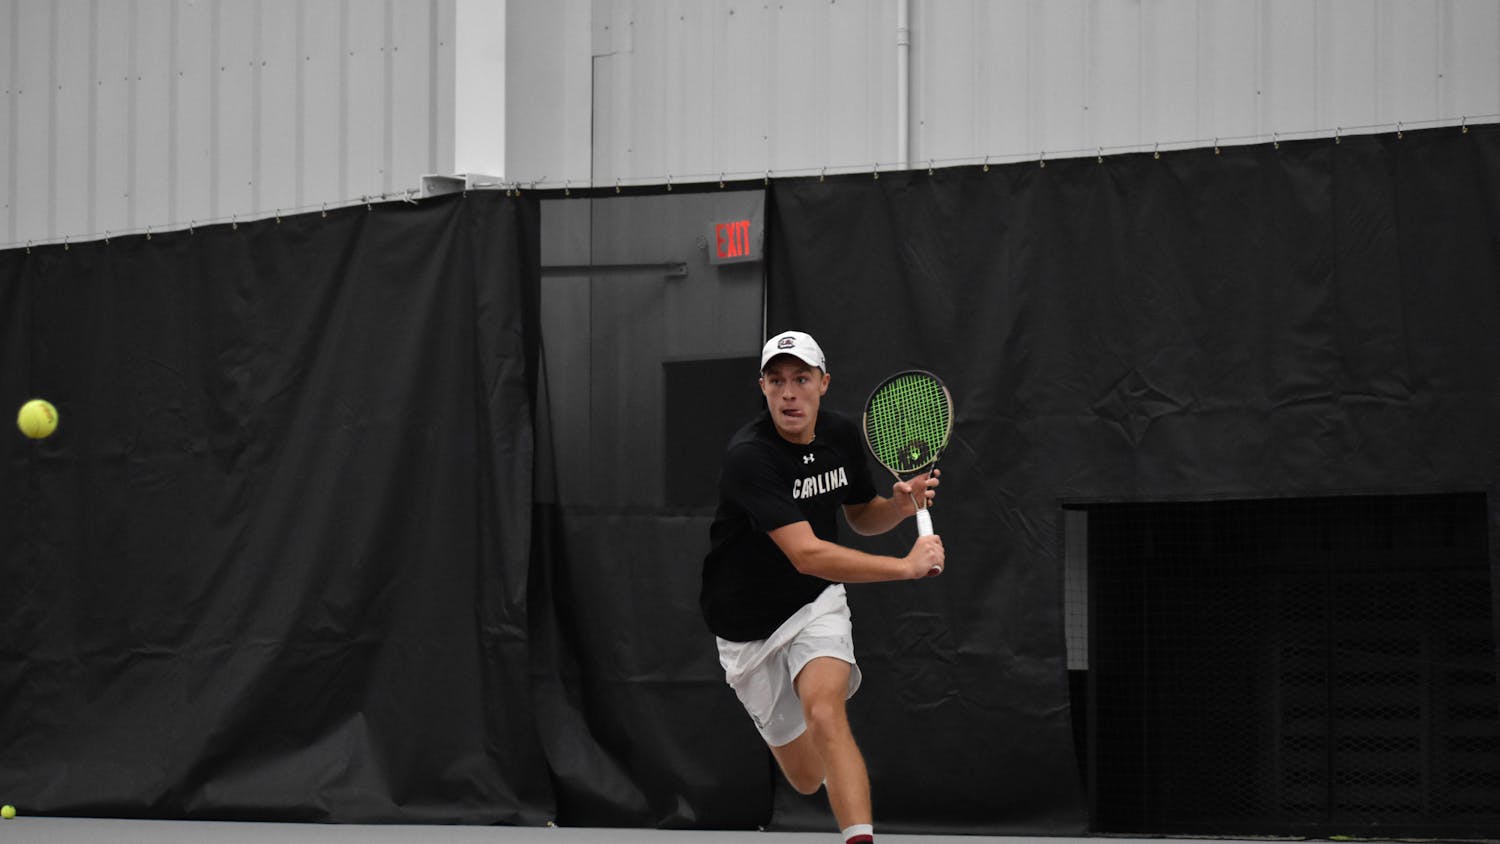 Junior James Story races to return a short-hit ball during his singles match on day two of the ITA Kickoff Weekend event at the Carolina Indoor Tennis Center on Jan. 29, 2023. The South Carolina Gamecocks beat N.C. State 4-0, making it the winner of the ITA tournament.&nbsp;